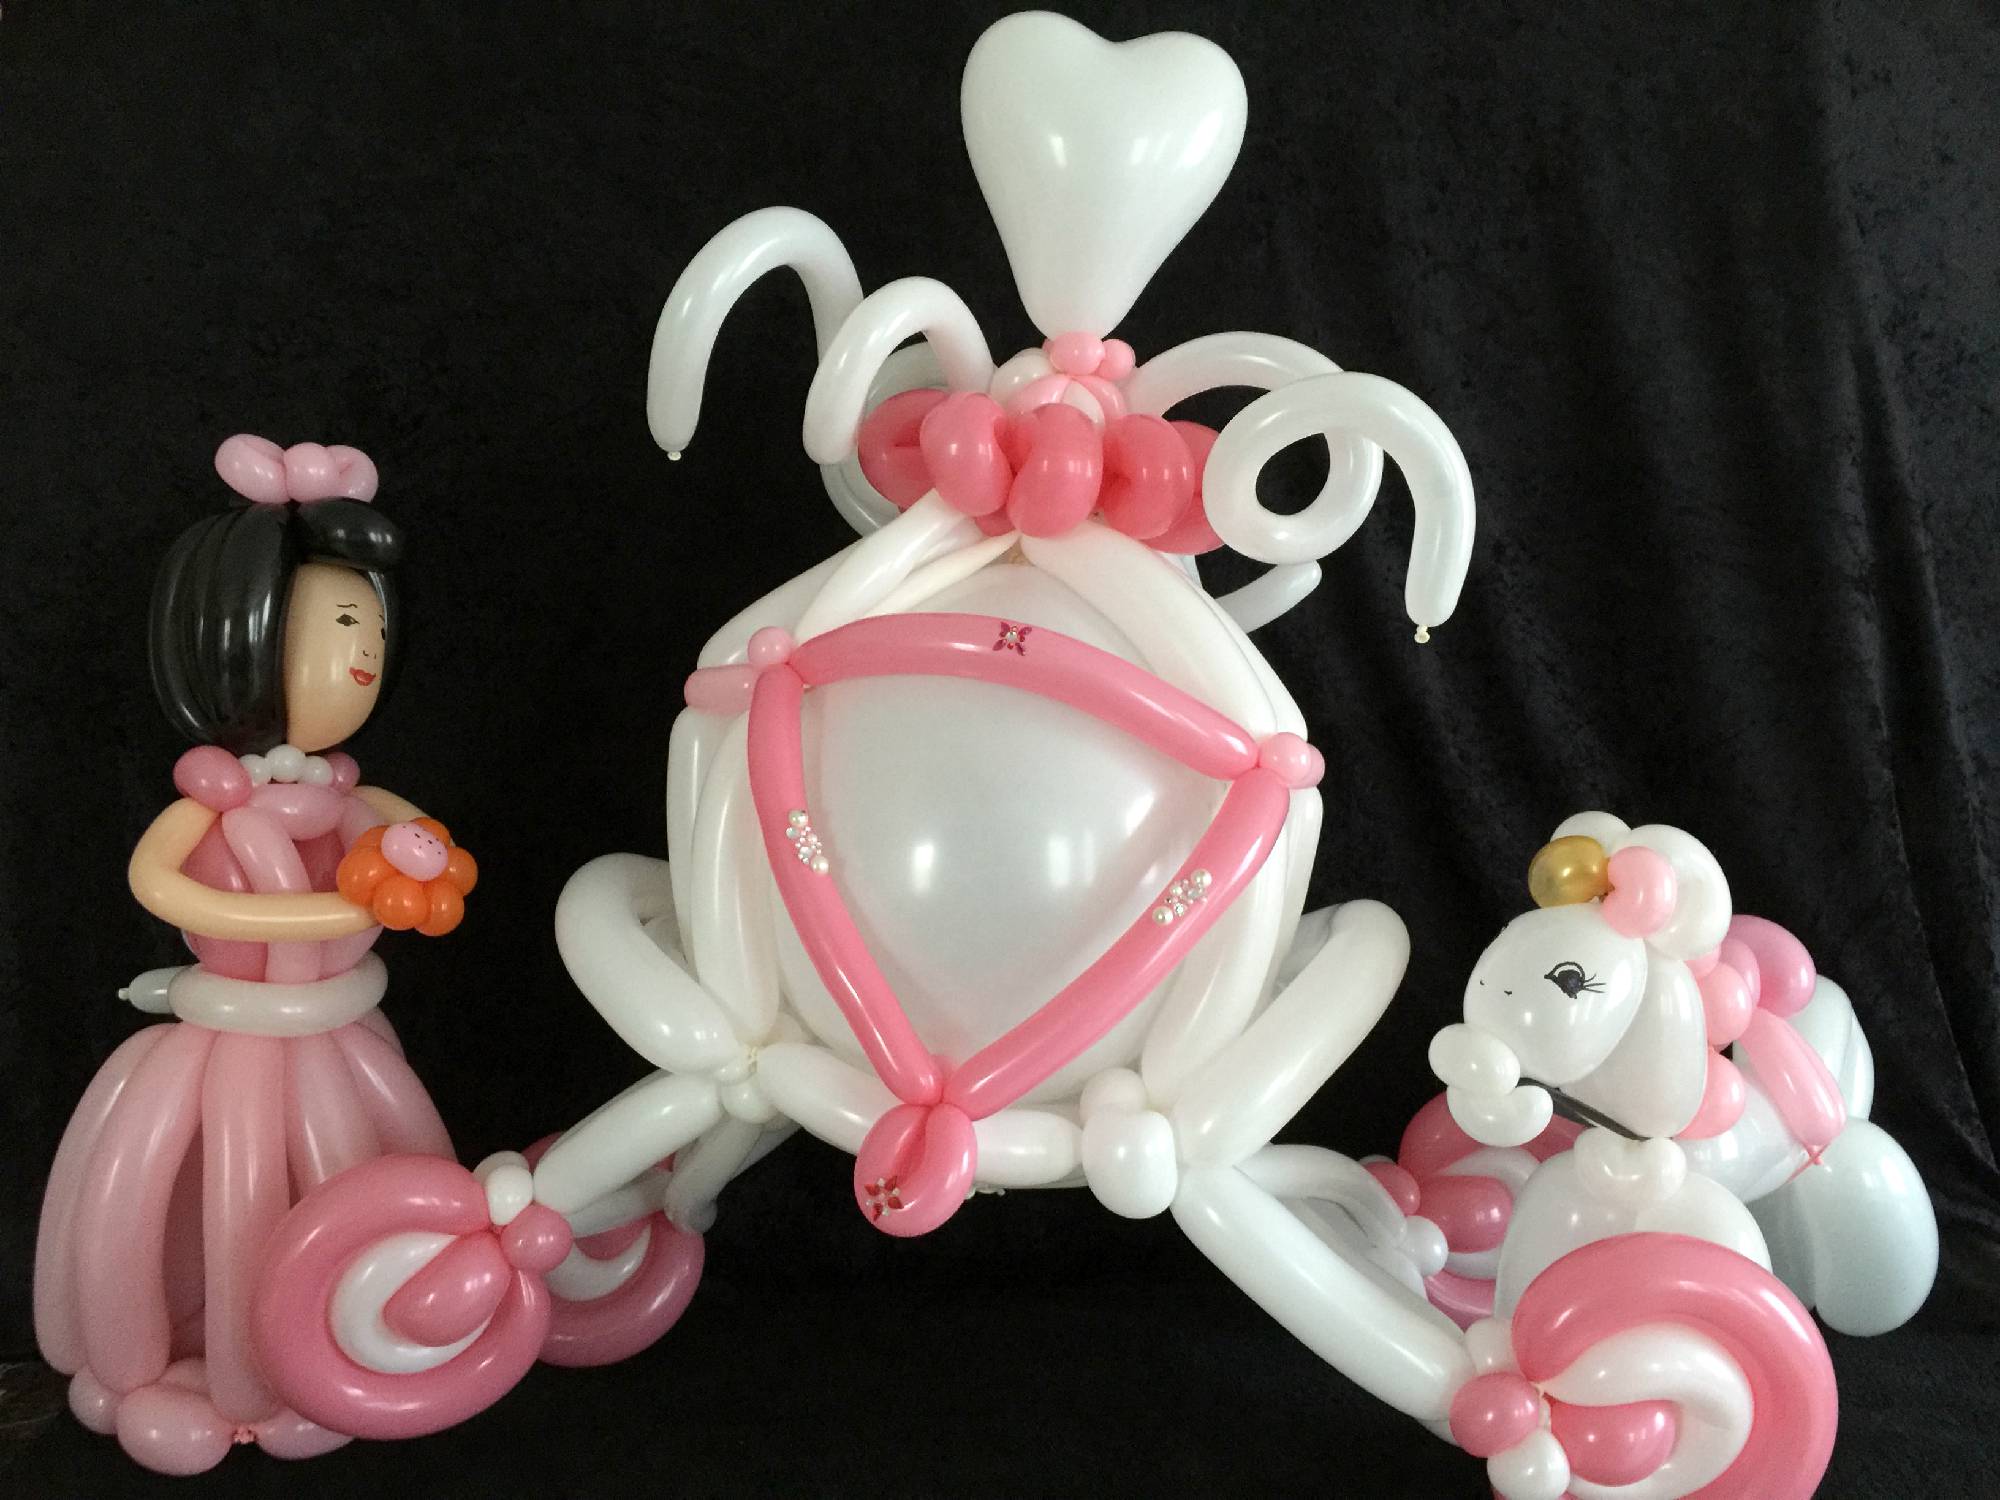 Princess and carriage balloon decoration